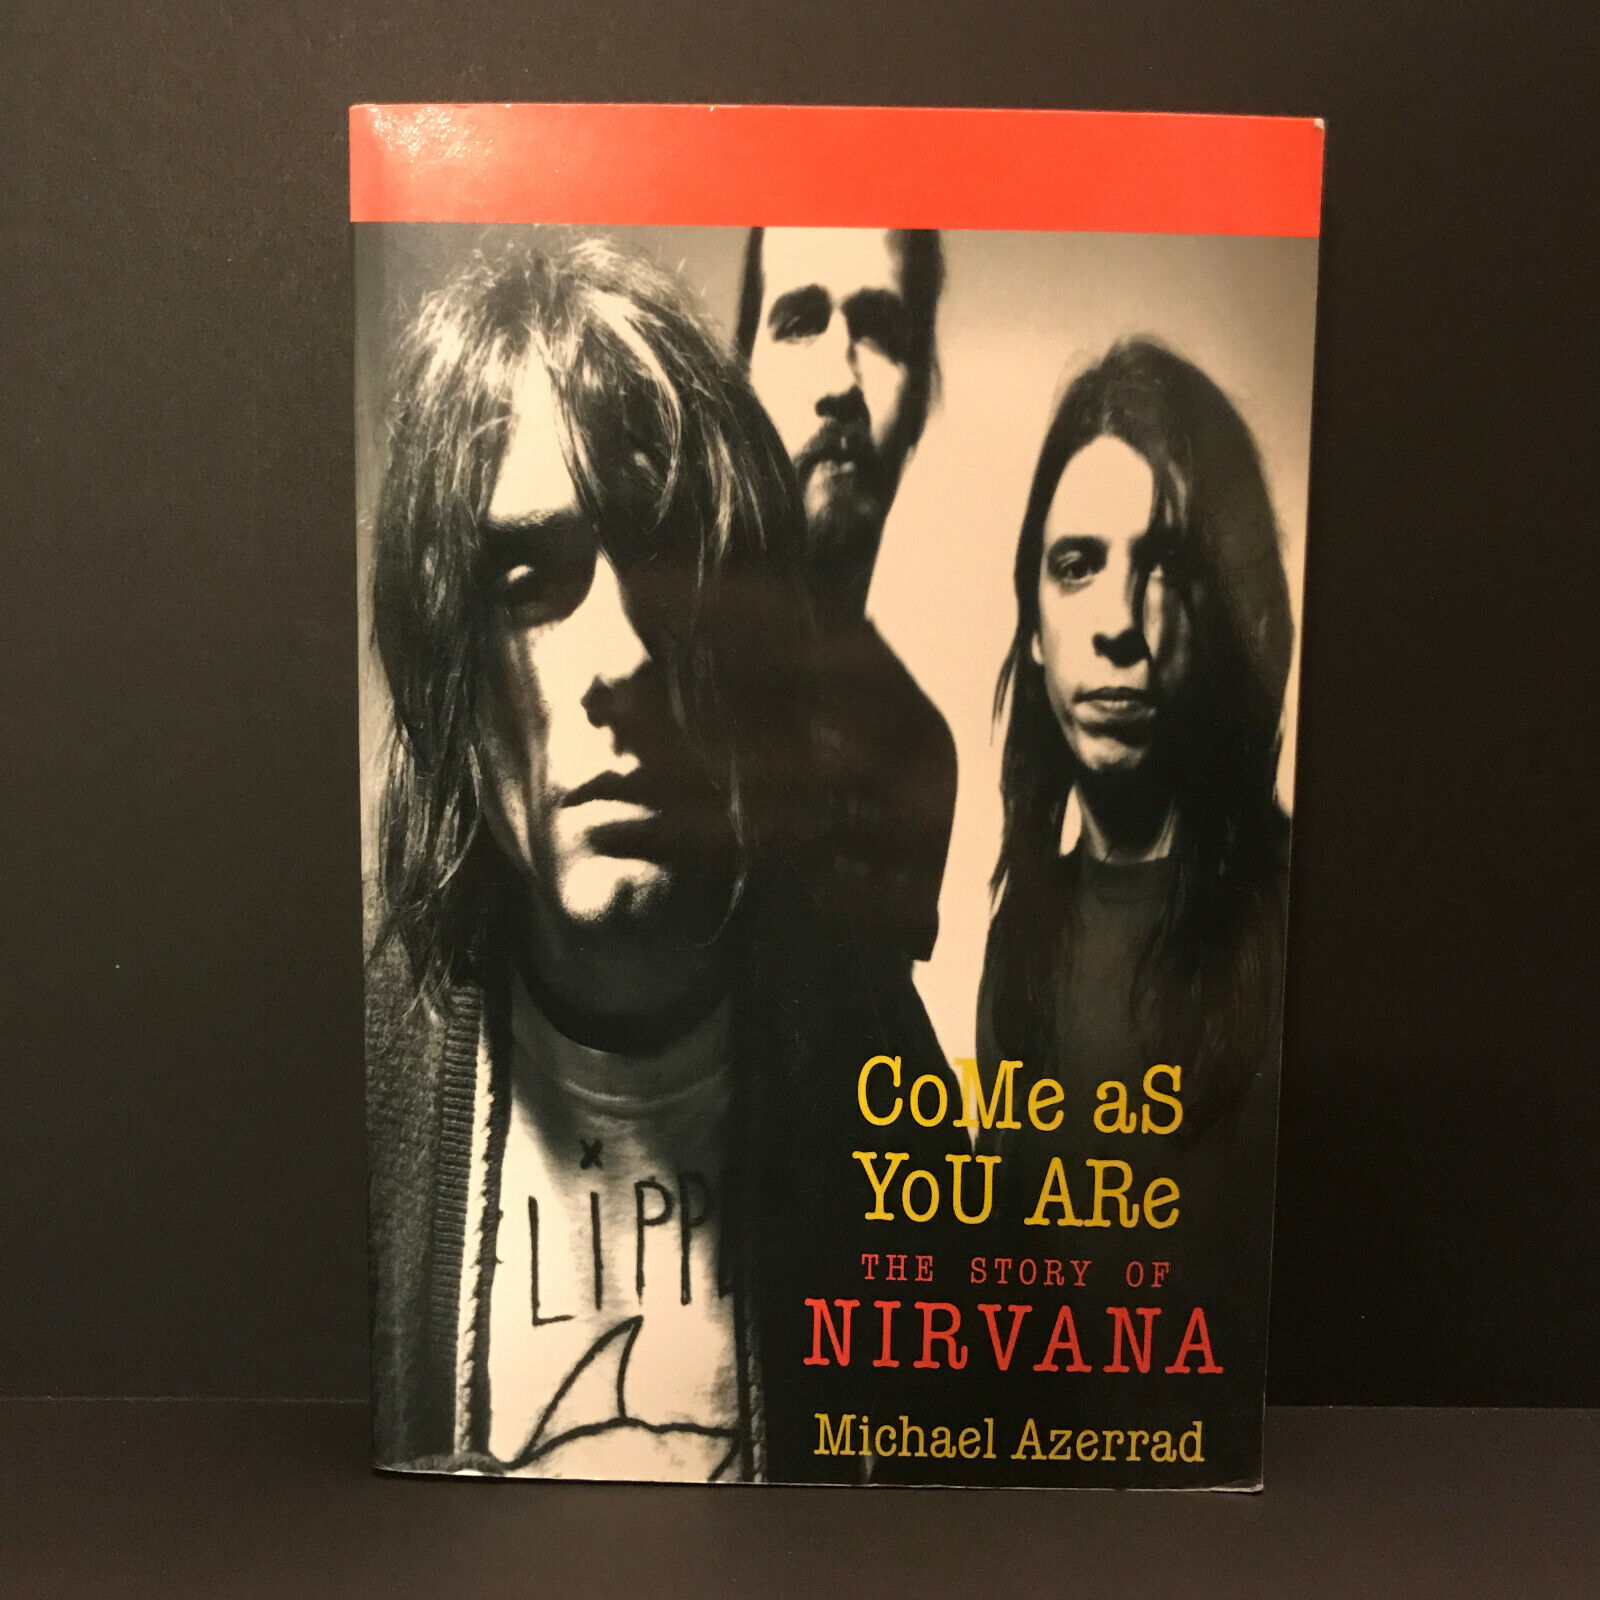 Come As You Are The Story Of Nirvana Cobain Book 1993 Michael Azerrad Excellent